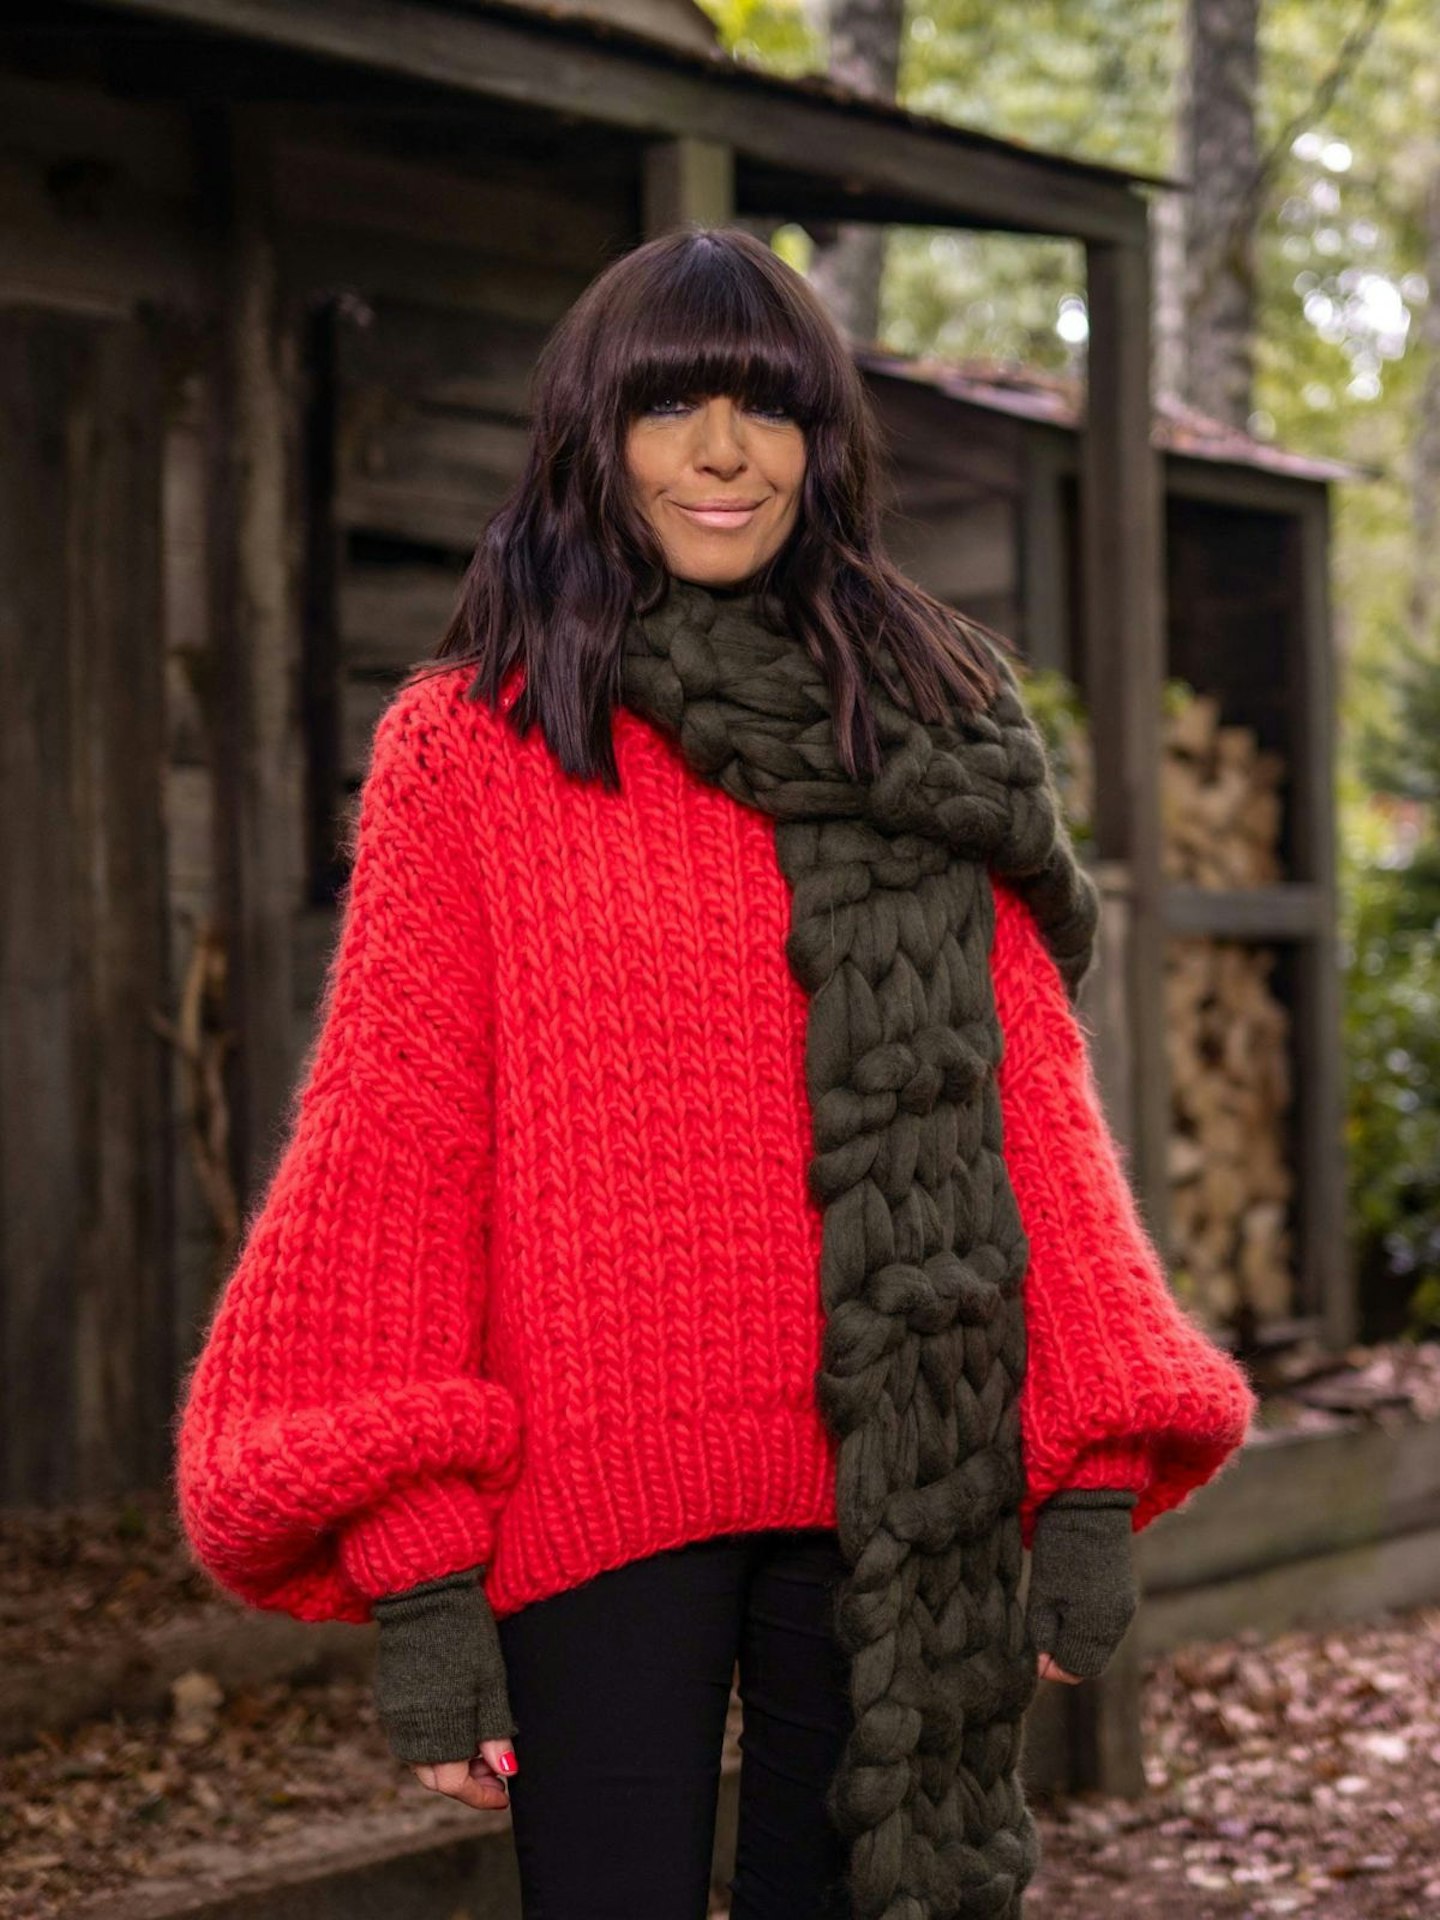 Knit Claudia Winkleman's jumper on The Traitors with this kit